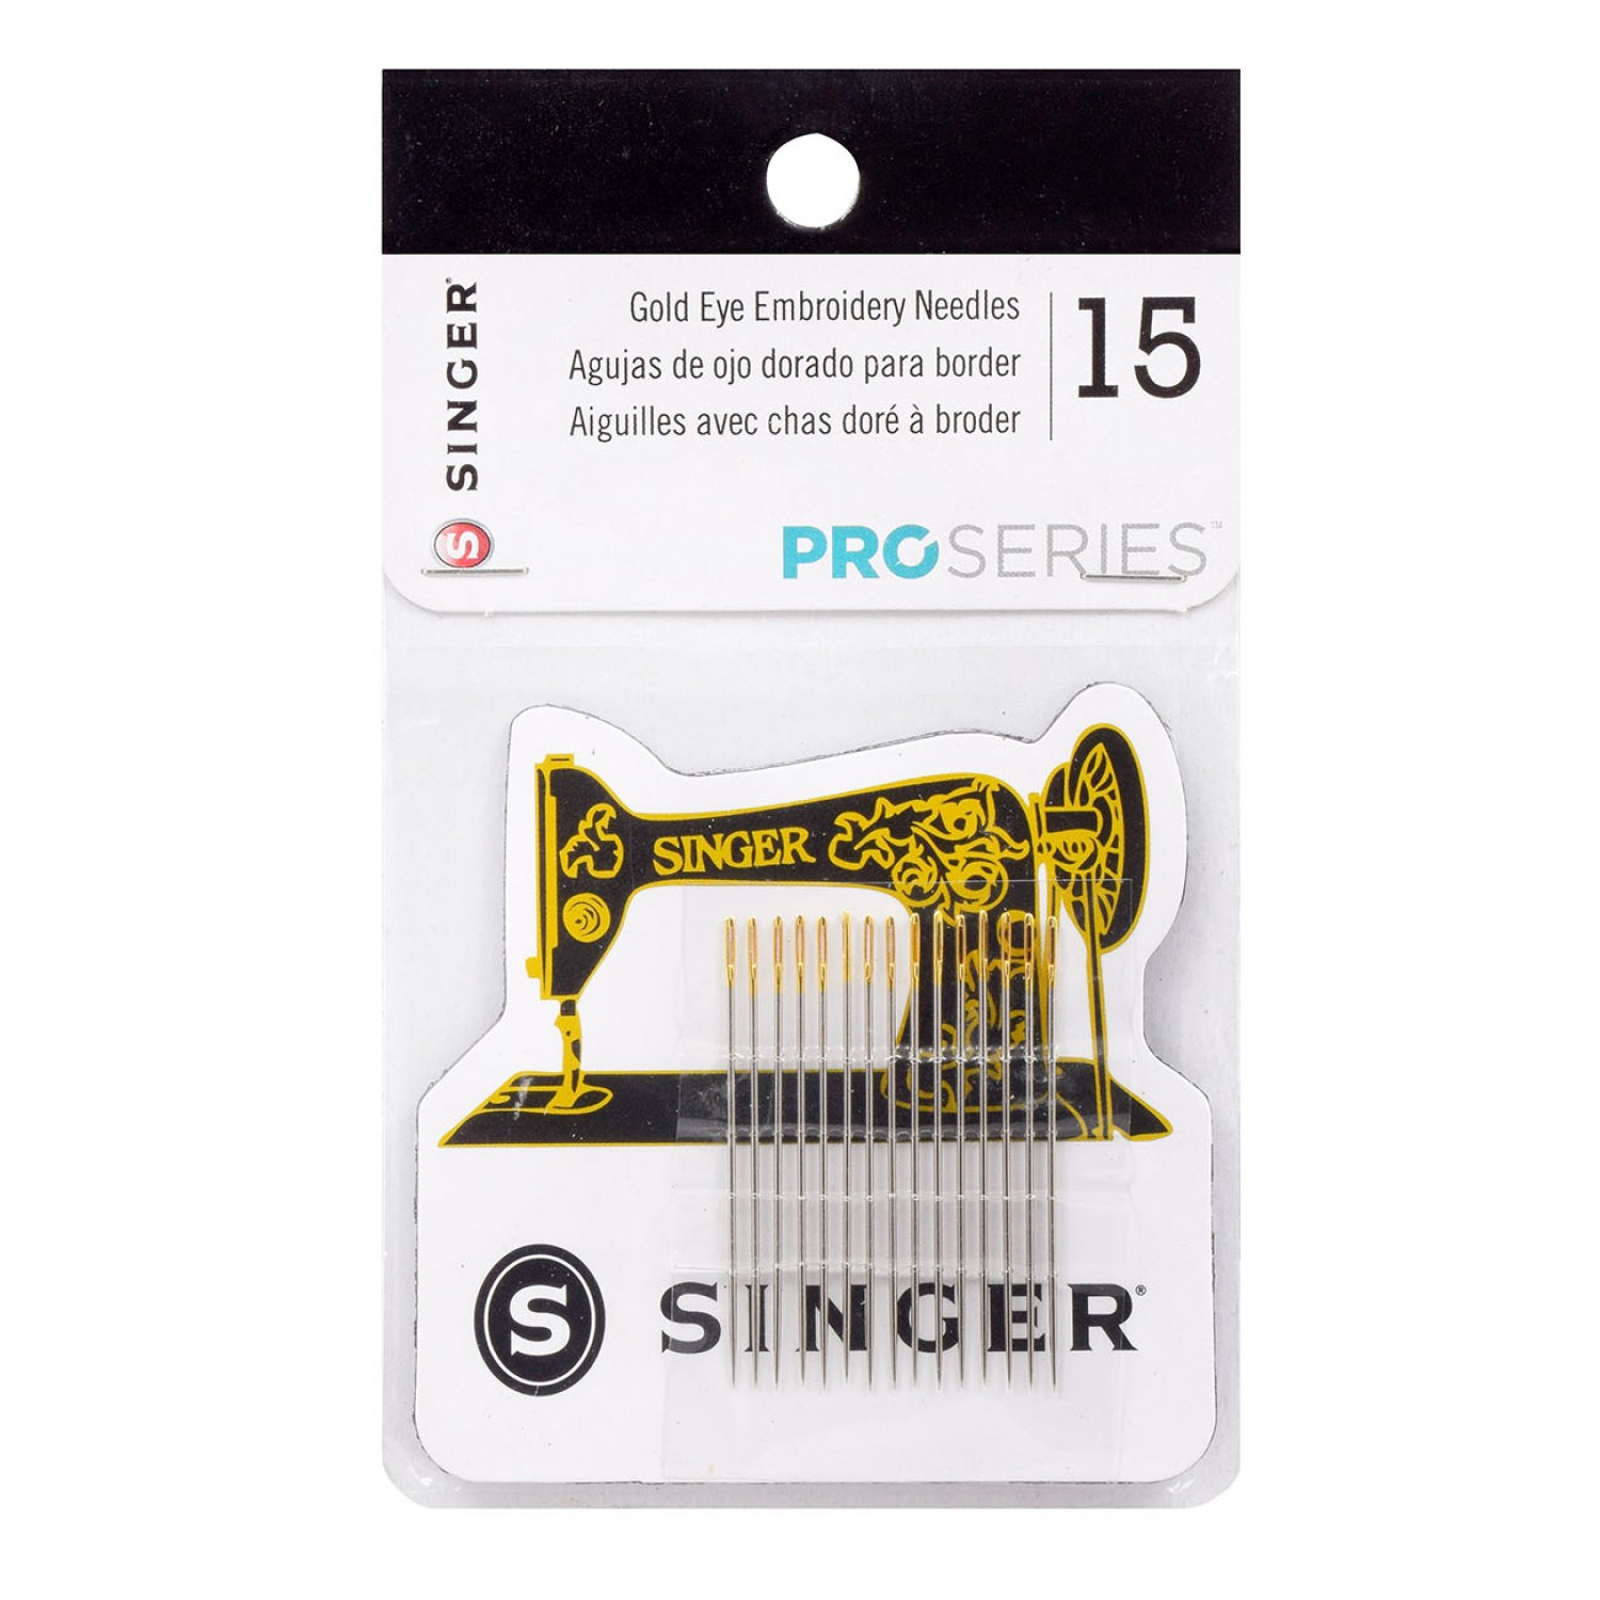 Singer ProSeries Size 5 Hand Embroidery Needles With Magnet 04325